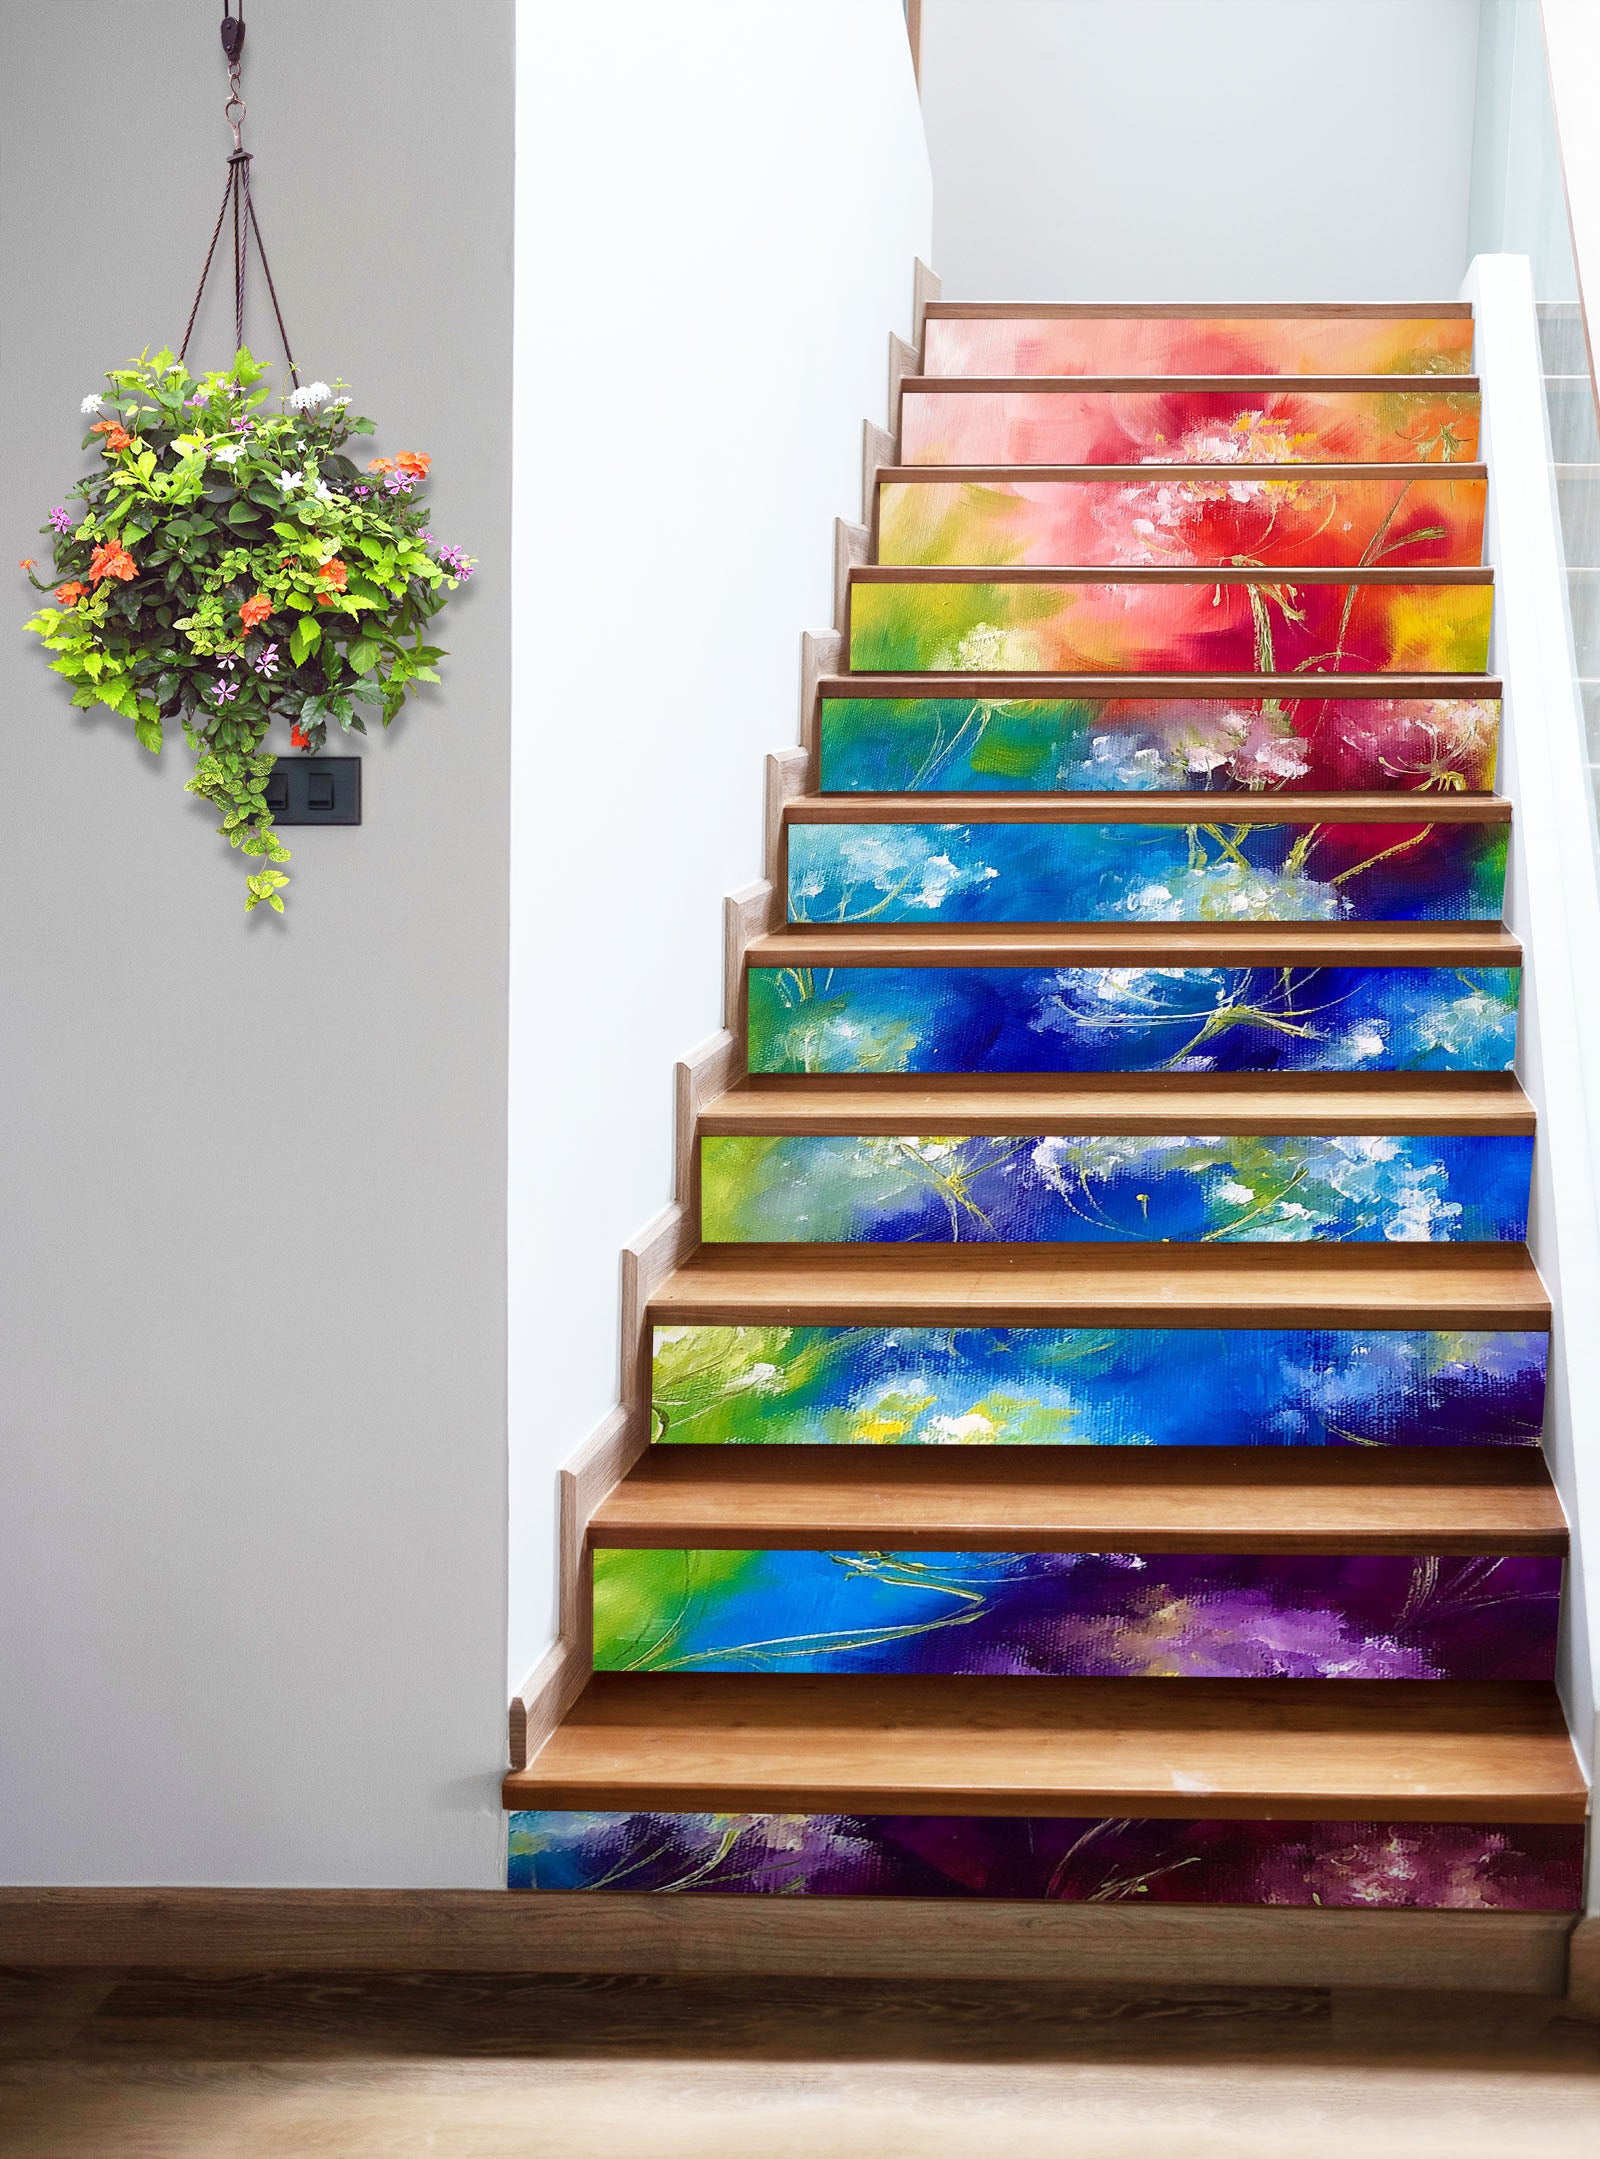 3D Color Painting 2212 Skromova Marina Stair Risers